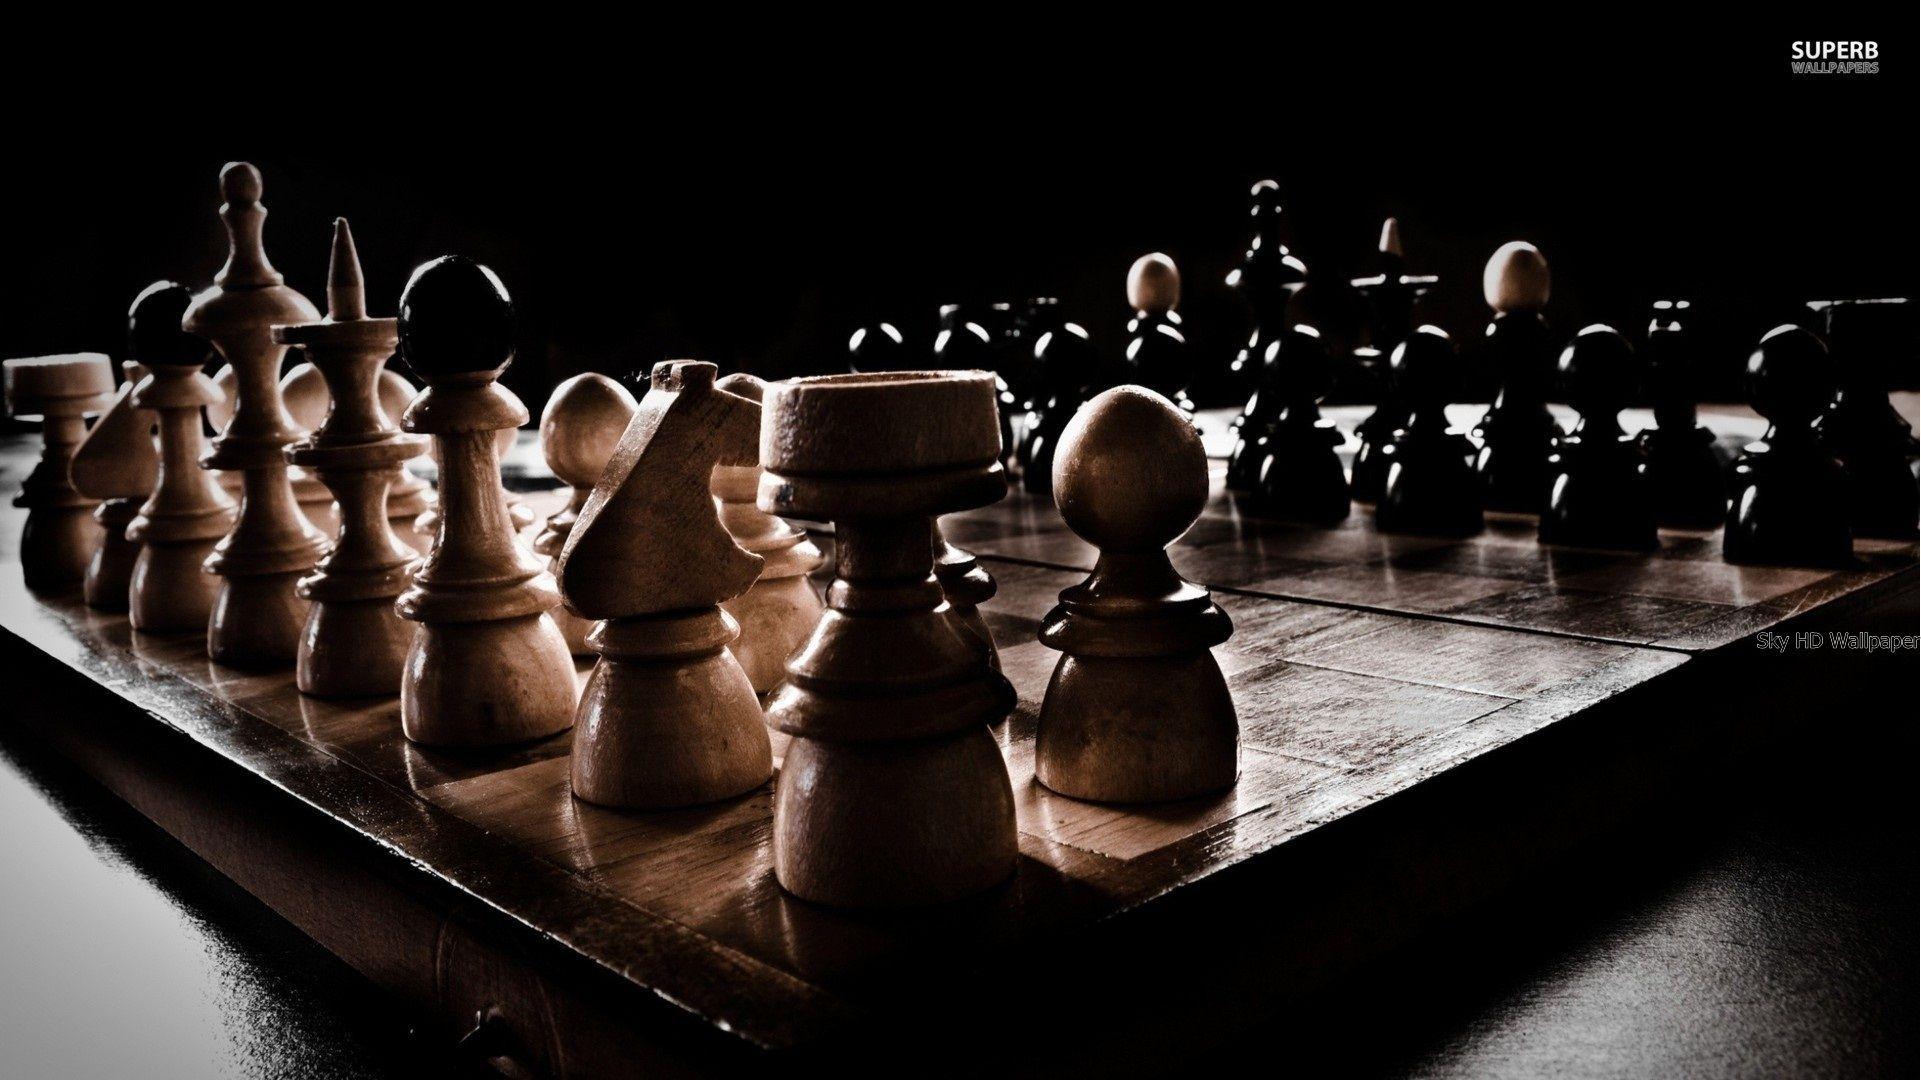 black-white-chess wallpaper by Changeover - Download on ZEDGE™